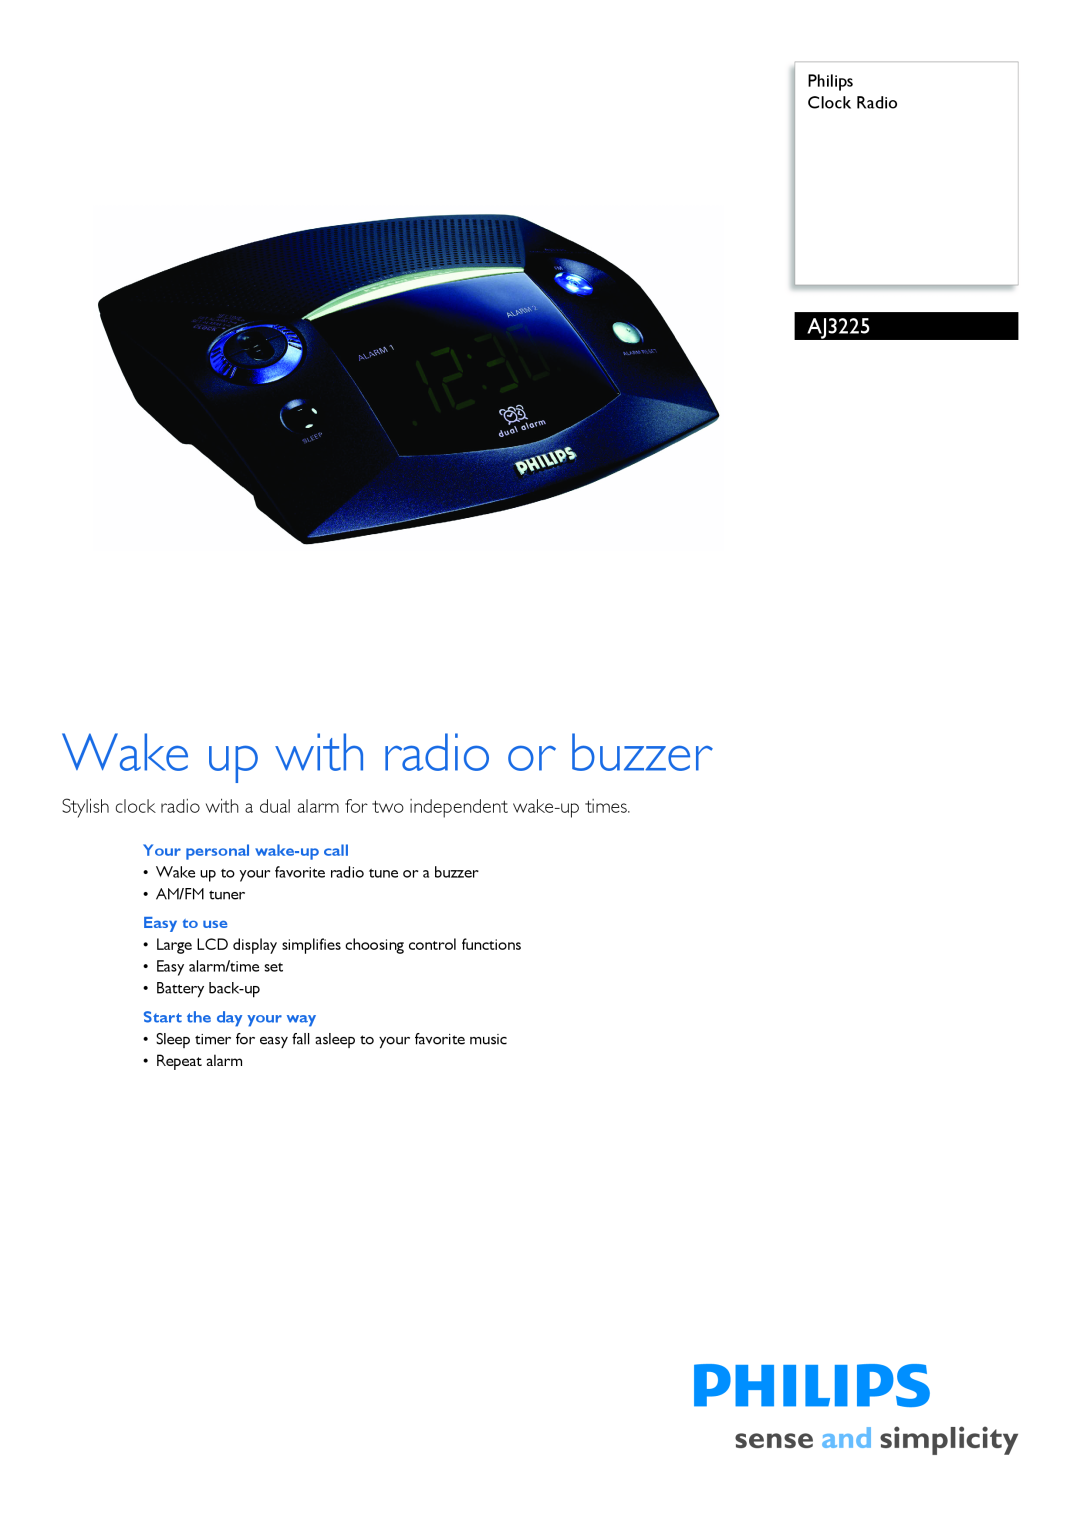 Philips AJ3225/79 manual Wake up with radio or buzzer, Philips Clock Radio, Easy alarm/time set Battery back-up 